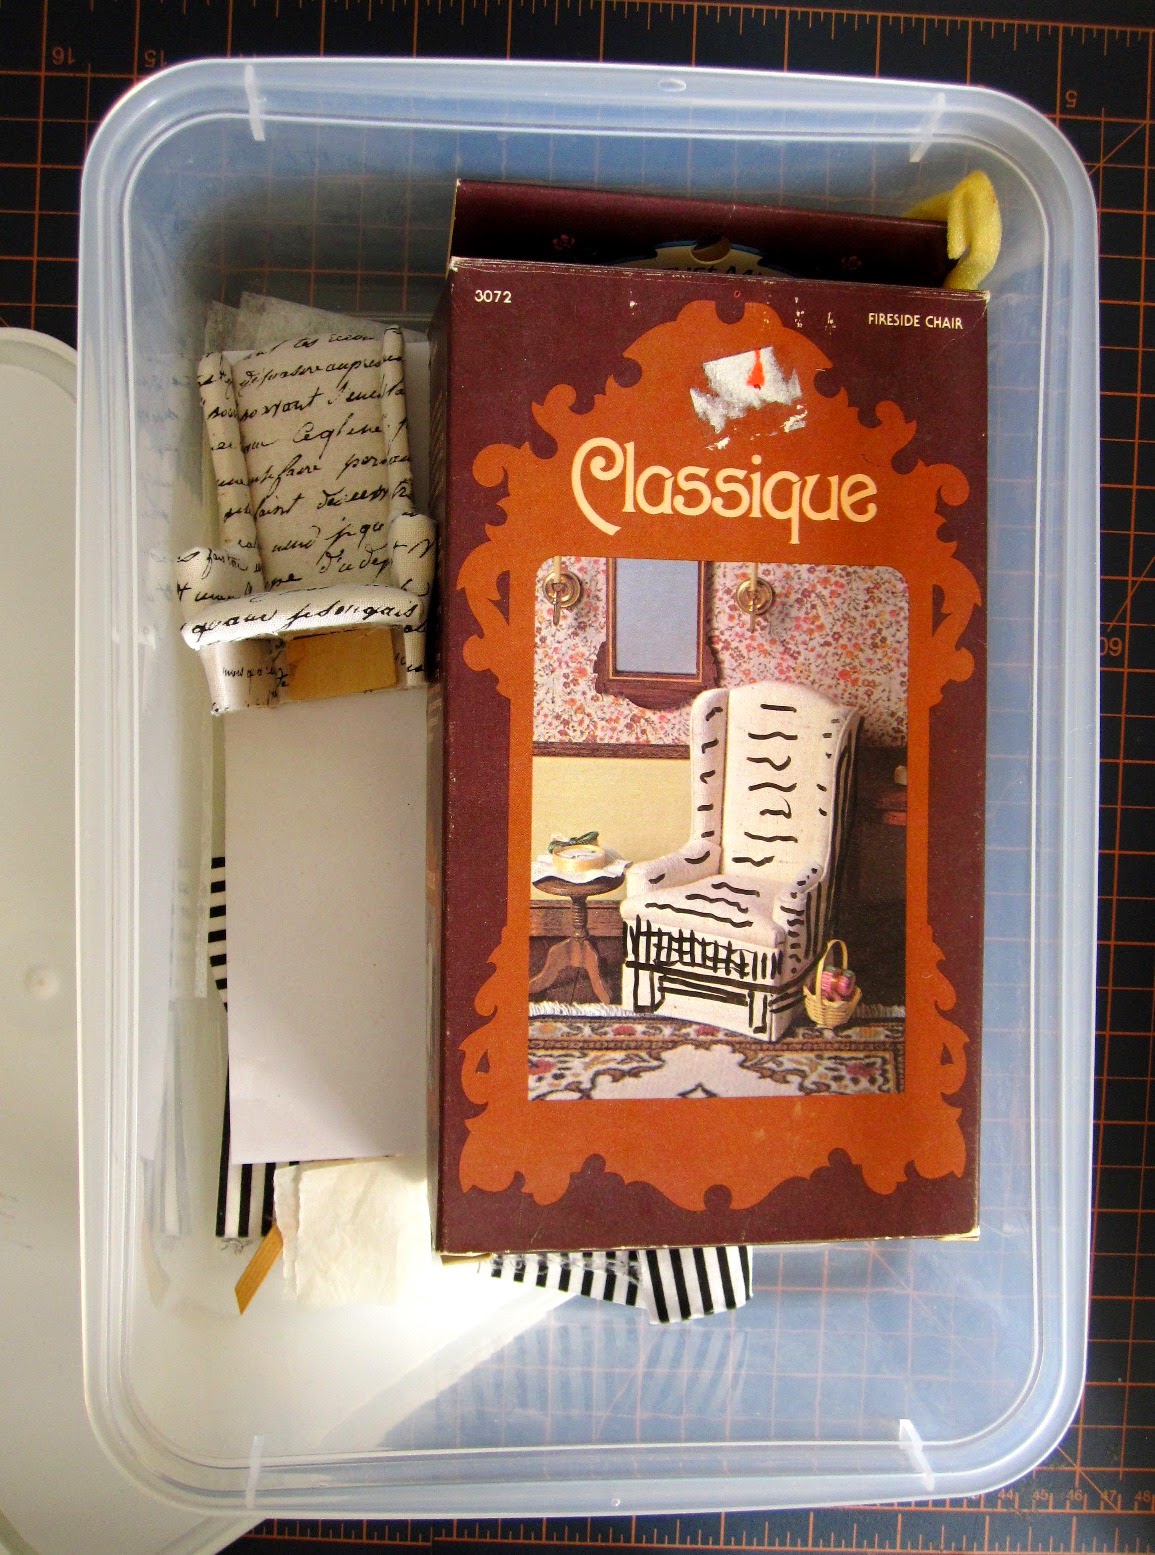 Plastic storage box containing a dolls' house miniature wing chair kit package, a half-finished chair and various pieces of fabric.